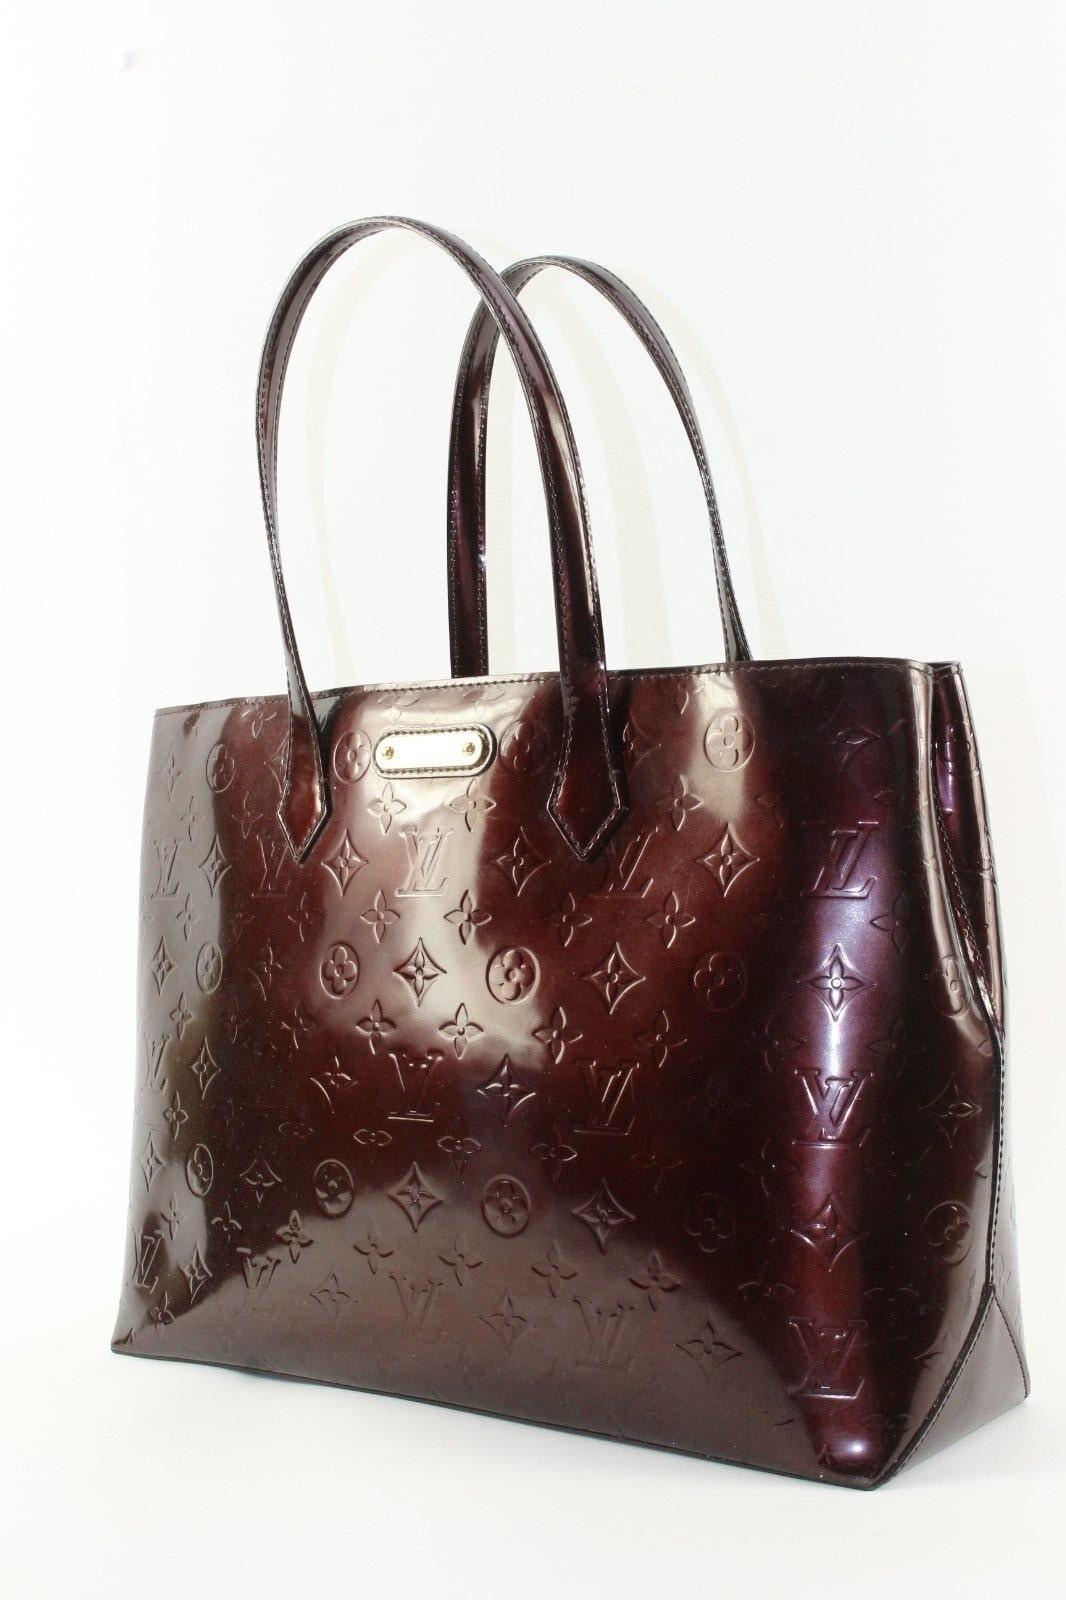 Louis Vuitton Amarante Vernis Tote 5LK1226K In Good Condition For Sale In Dix hills, NY